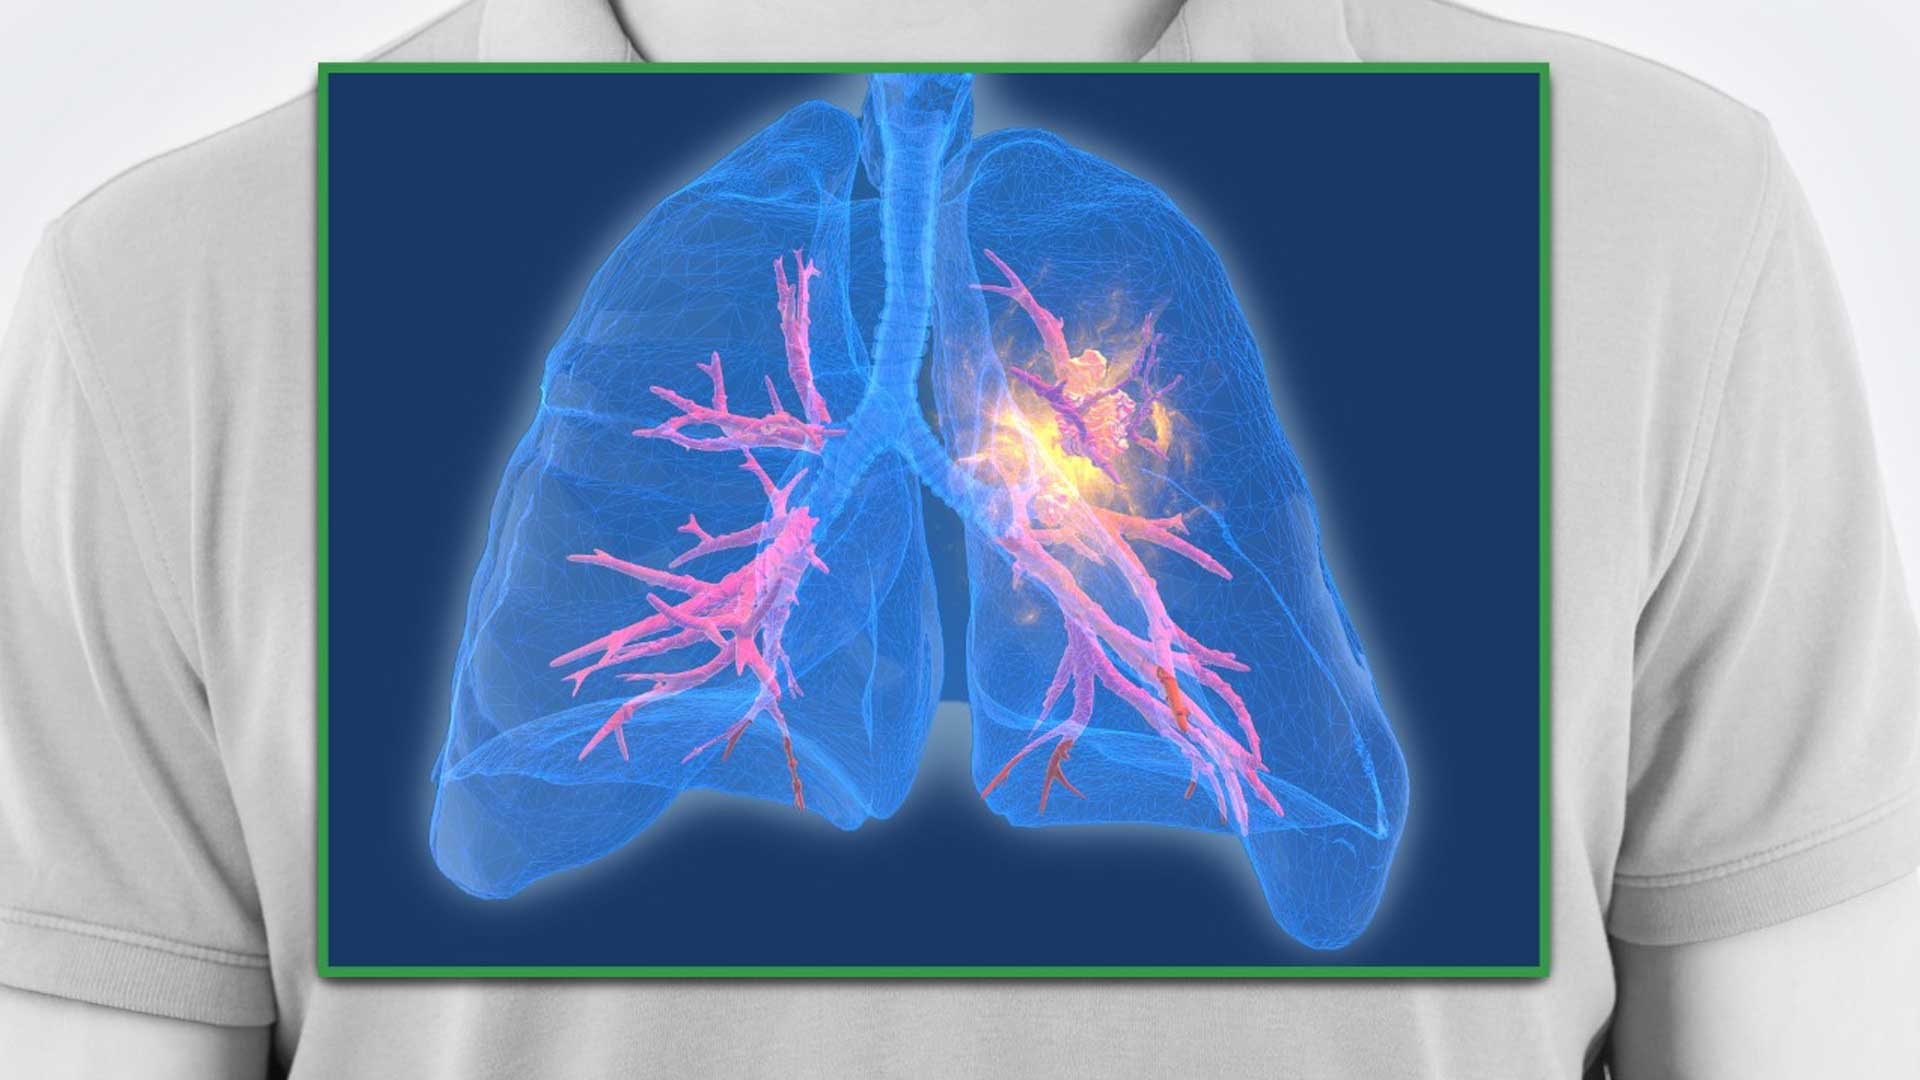 Case Study: Non-Small Cell Lung Cancer (NSCLC) Treatment